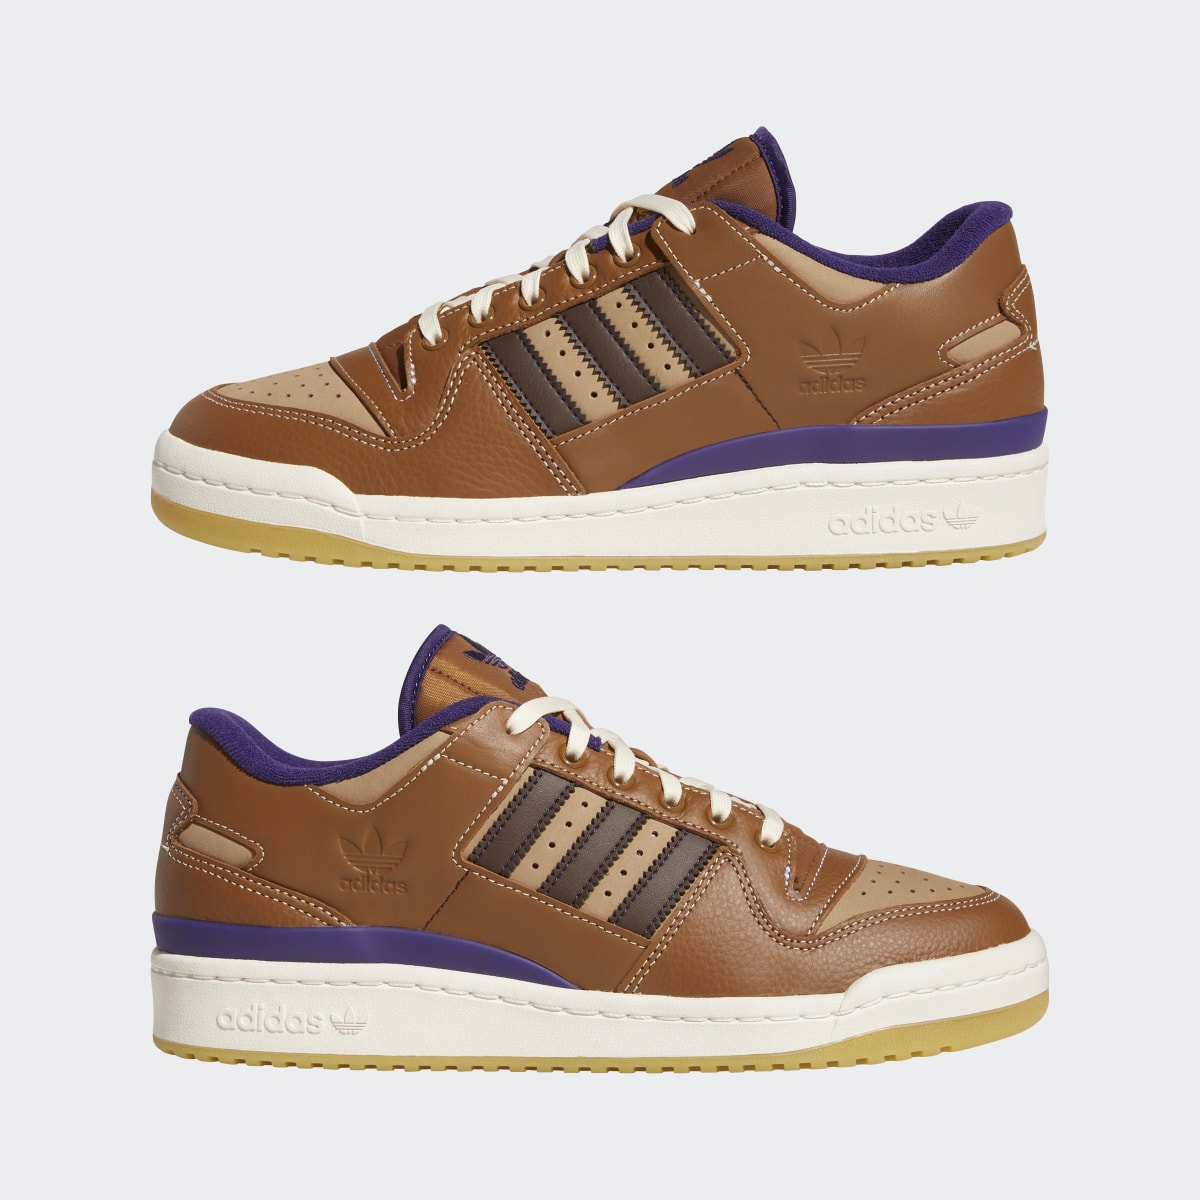 Adidas Heitor Forum 84 Low ADV Shoes. 10